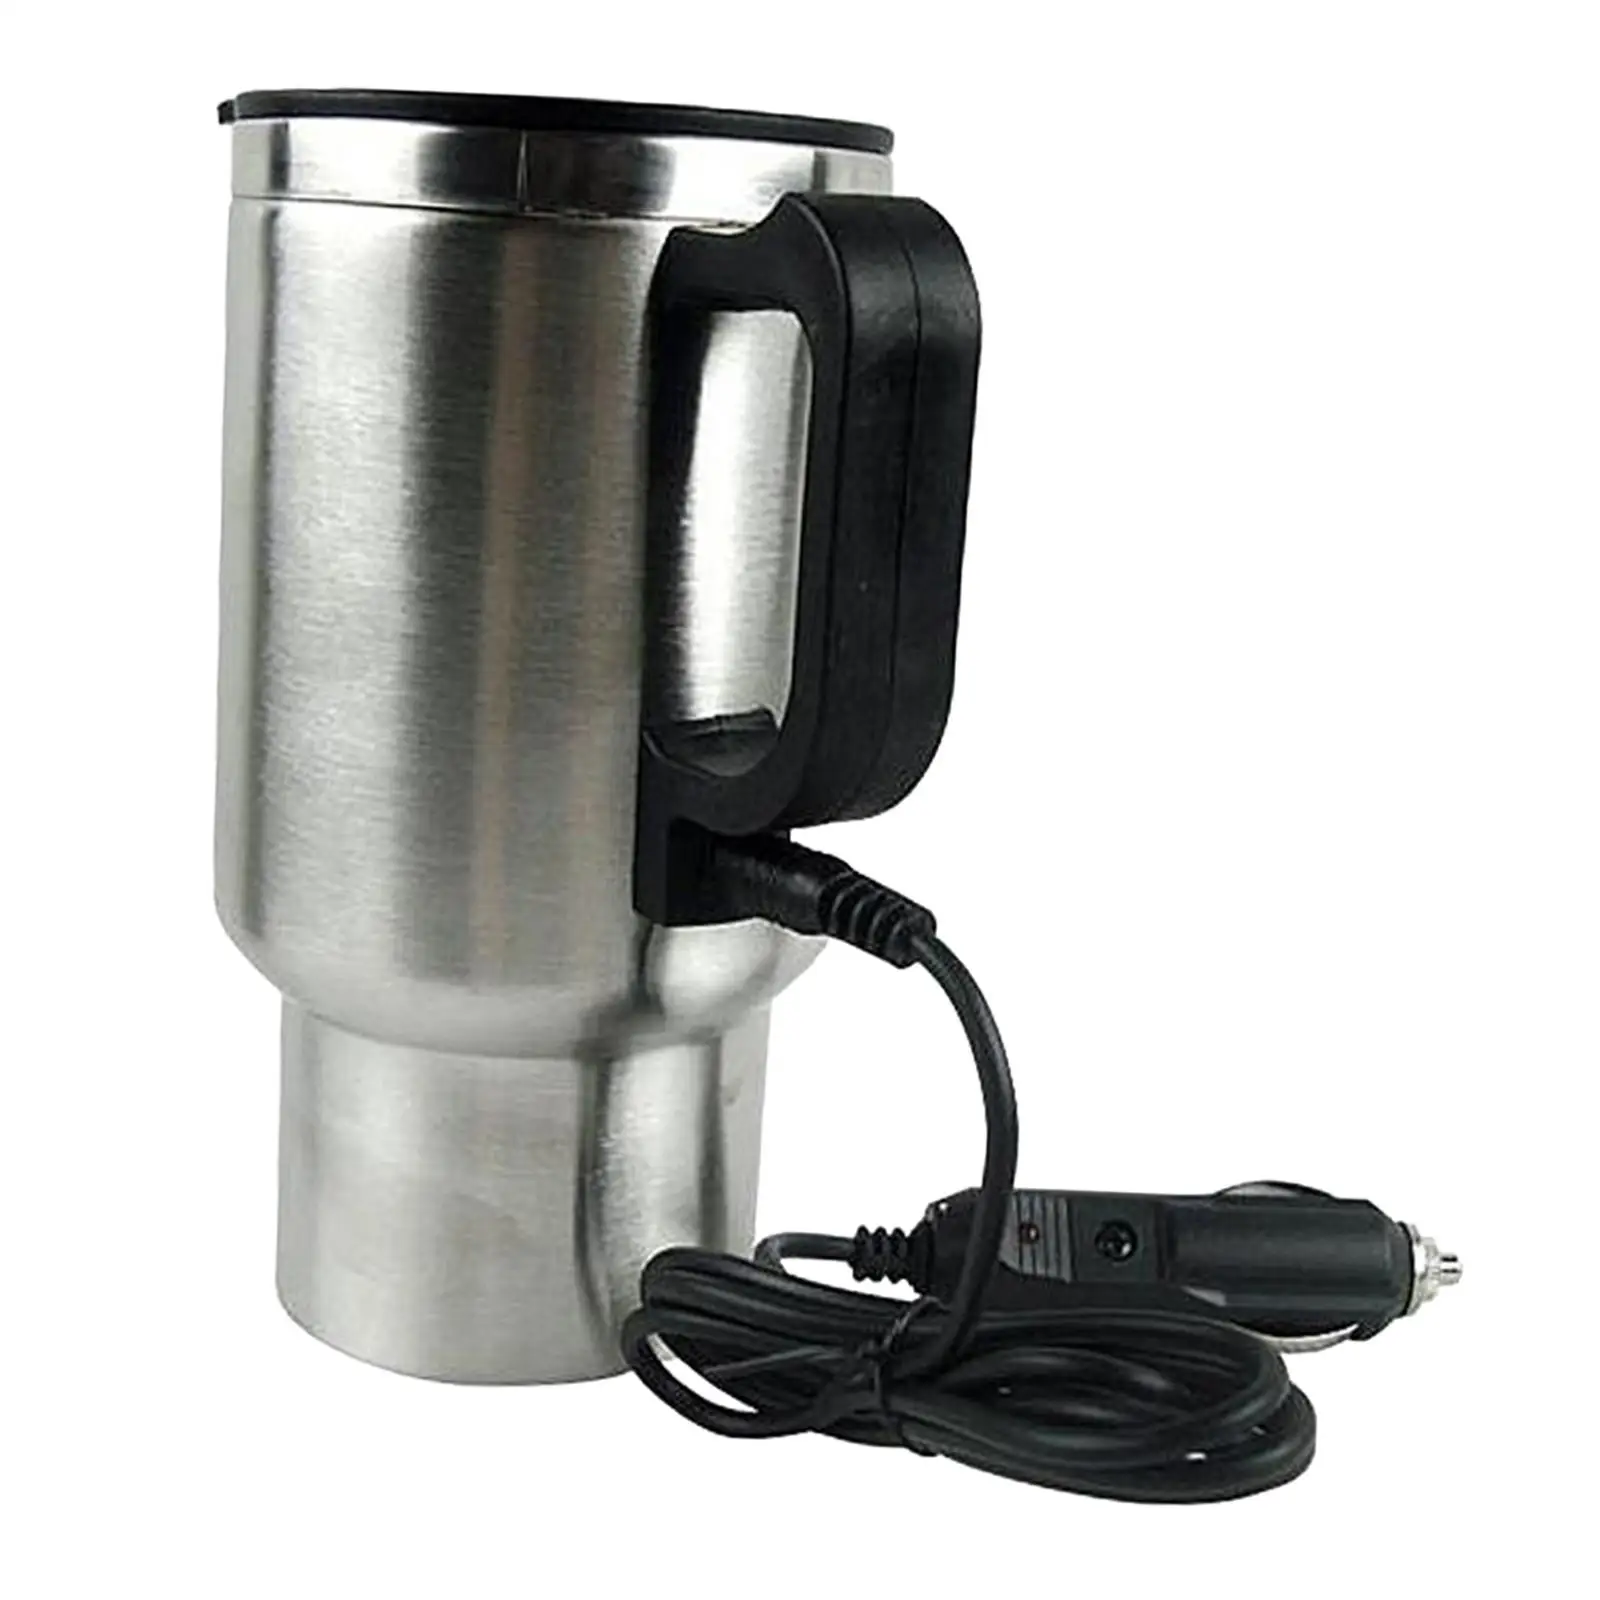 Car Electric Heating Mug Cup Travel Kettle 12V 0.48L Water Bottle Stainless Steel for Water Tea Coffee Milk Multipurpose